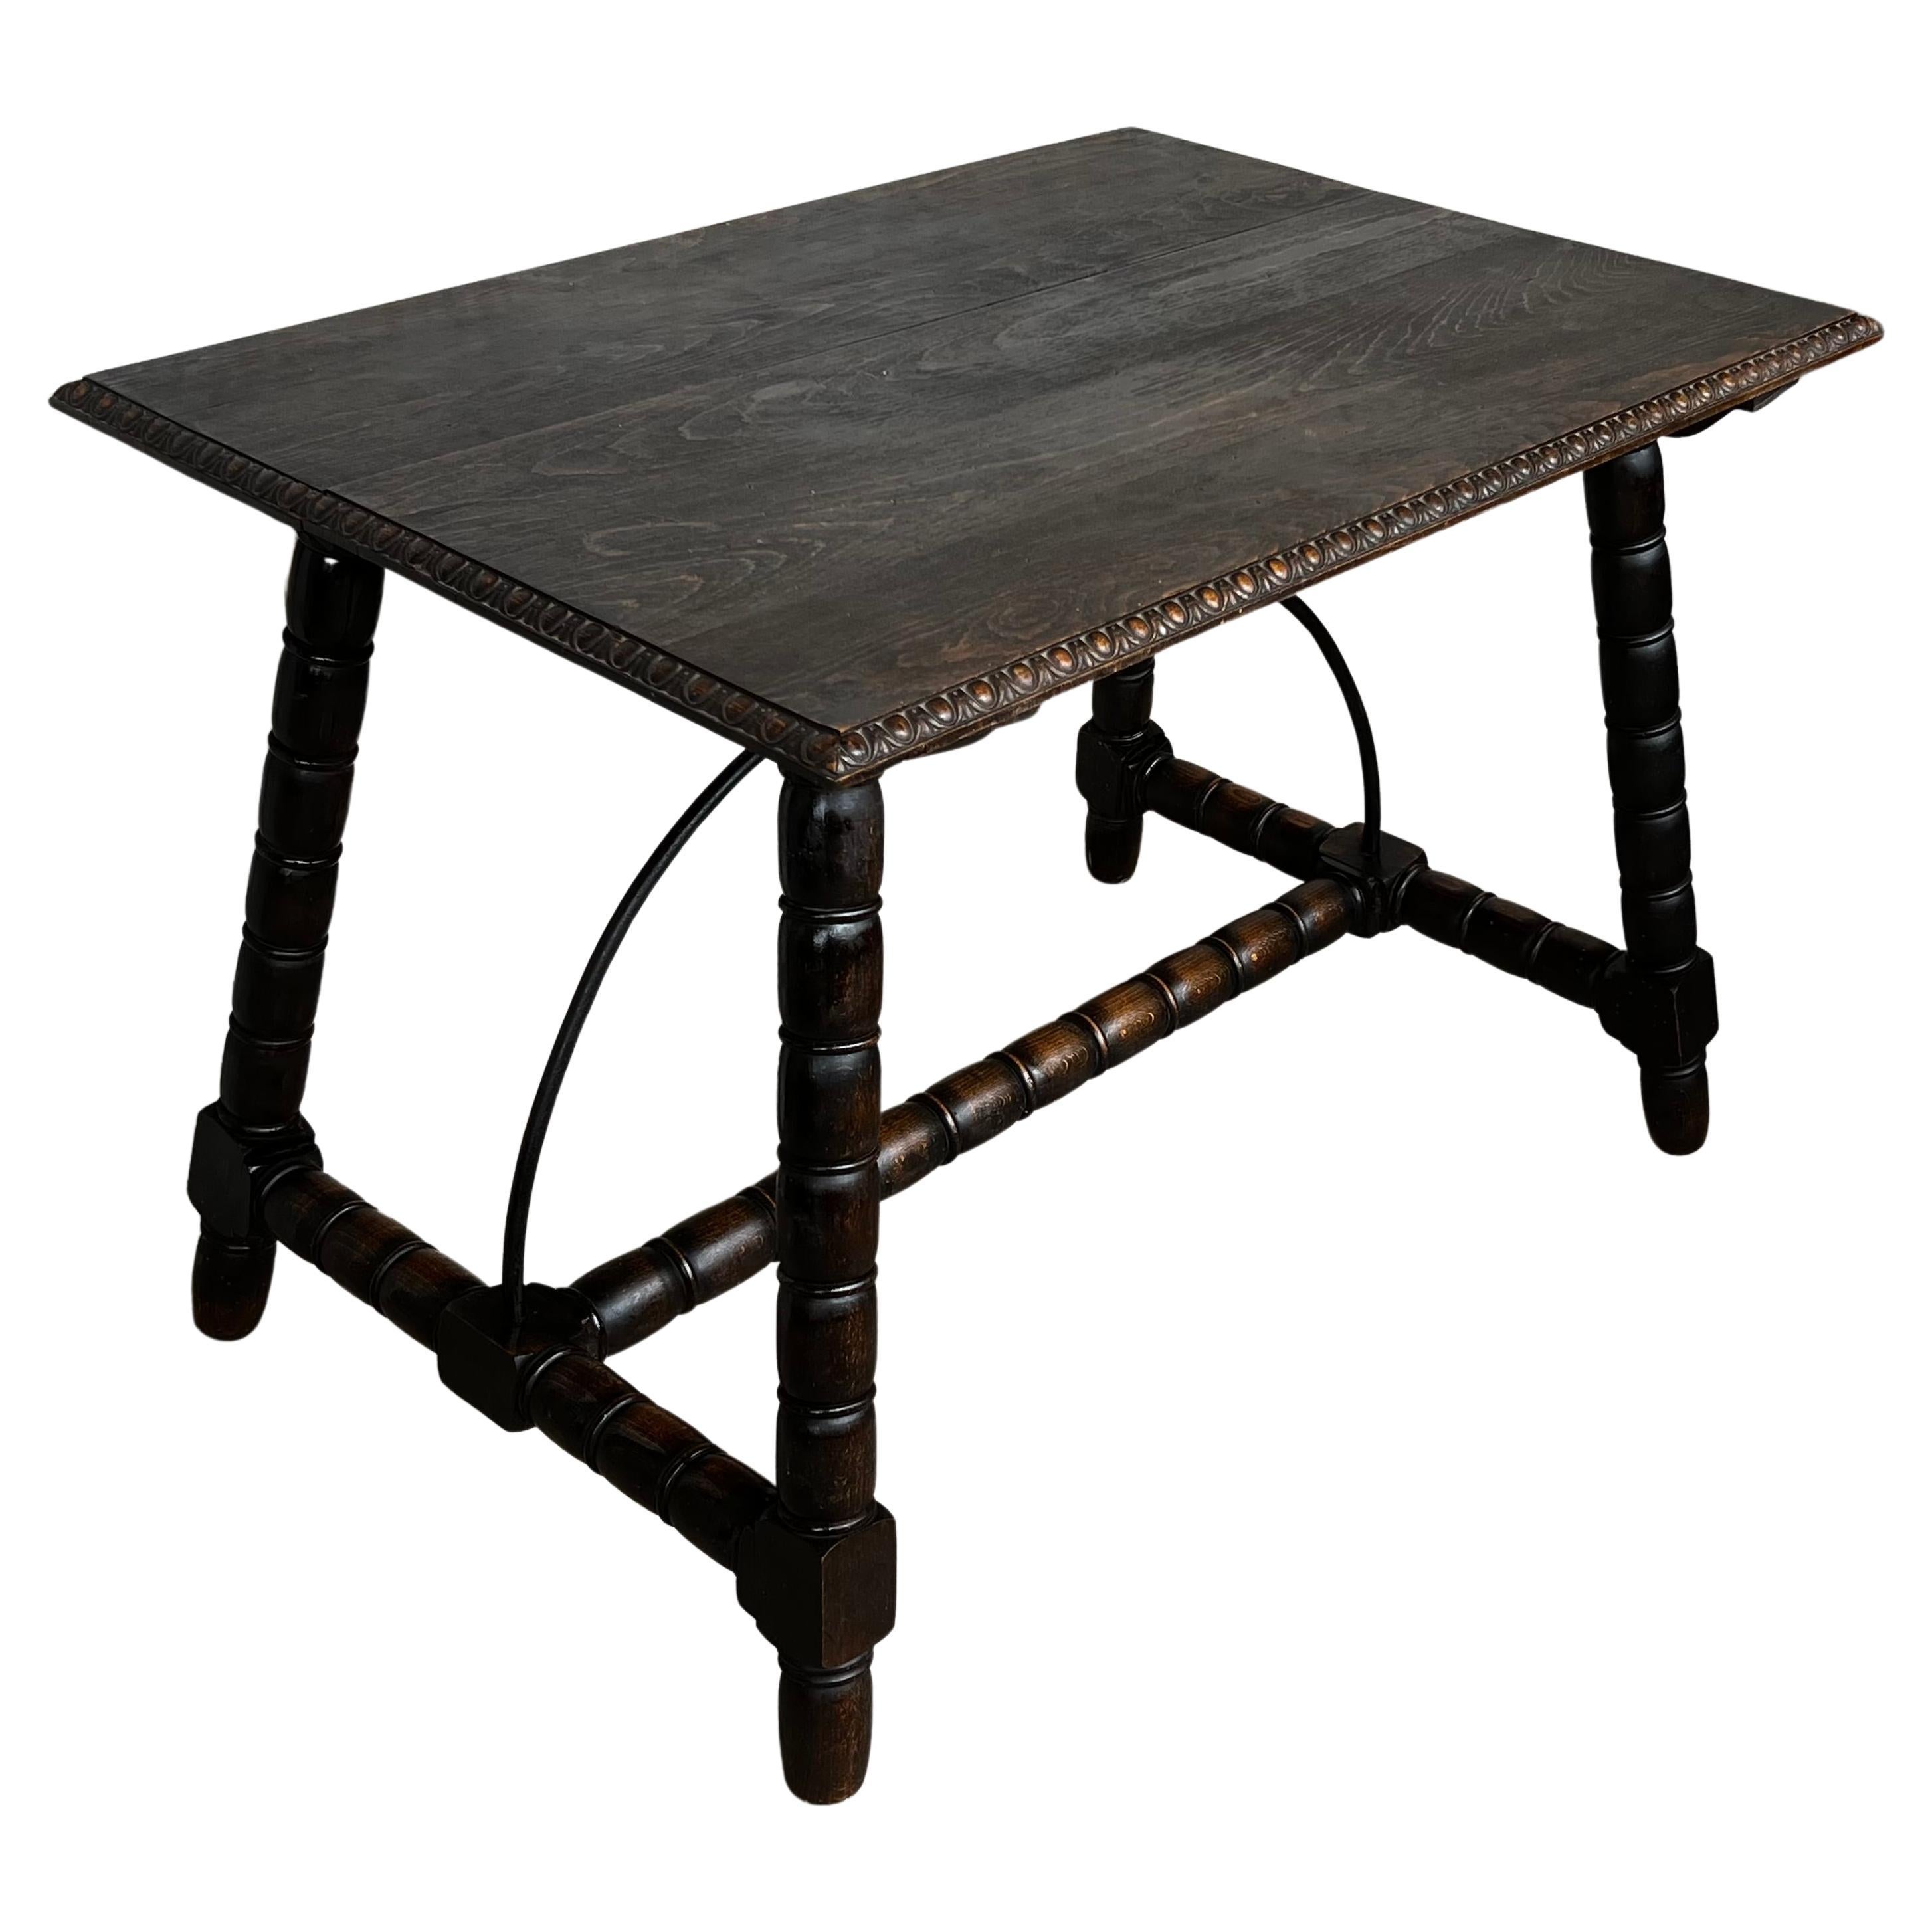 19th Spanish Side Table with Cared Turned Legs and Wood Stretcher